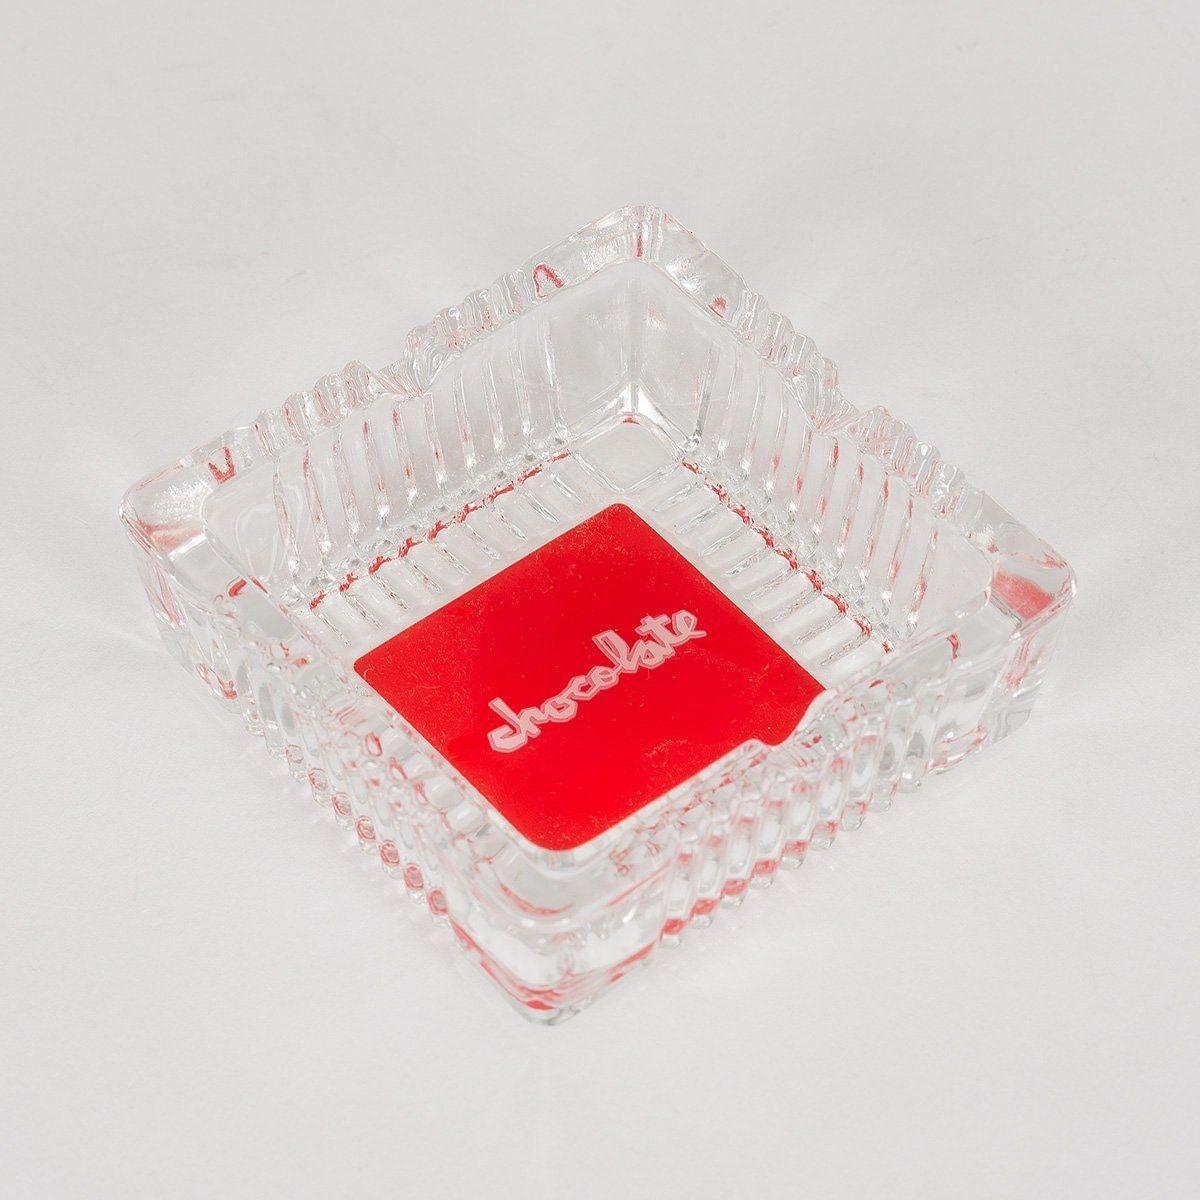 S a Red Square Logo - Chocolate Red Square Ashtray Red.co.uk